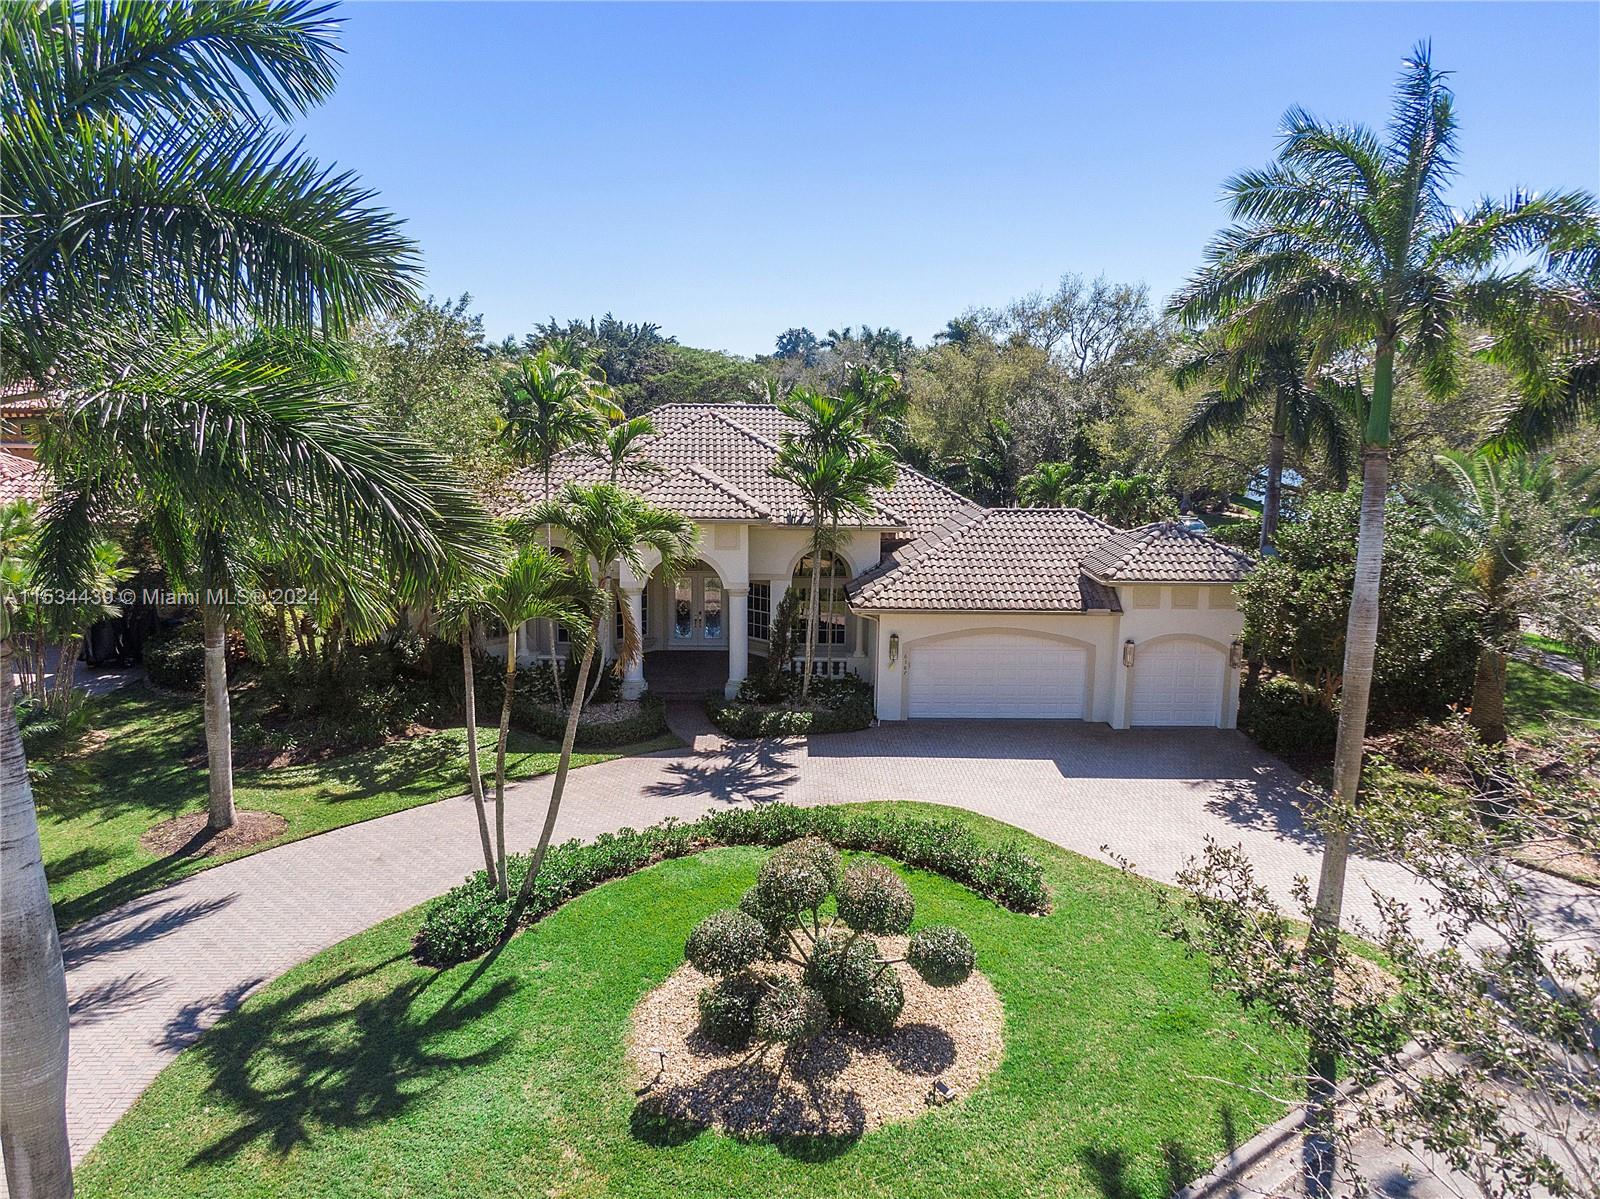 6387 NW 120th dr, Parkland, Florida 33076, 6 Bedrooms Bedrooms, ,3 BathroomsBathrooms,Residential,For Sale,6387 NW 120th dr,A11534439